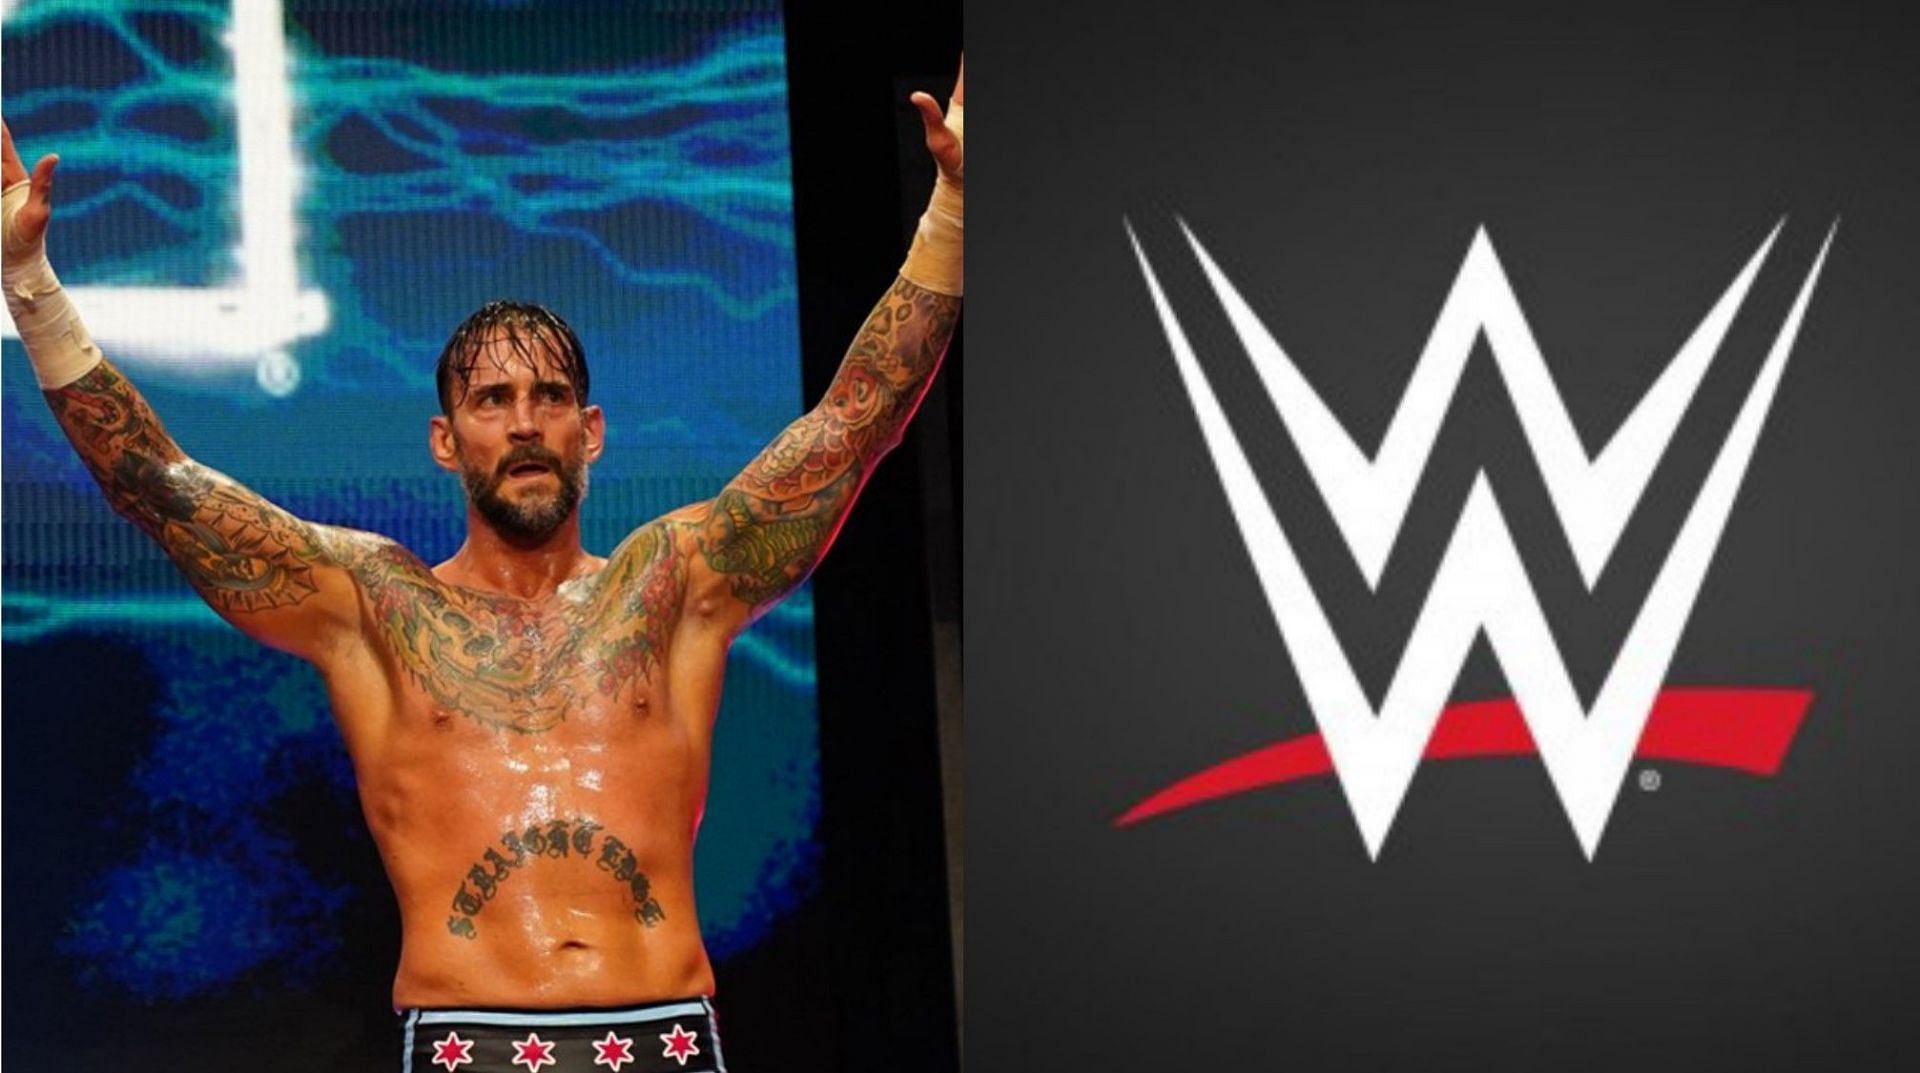 Roblox Song Id for Cm Punk